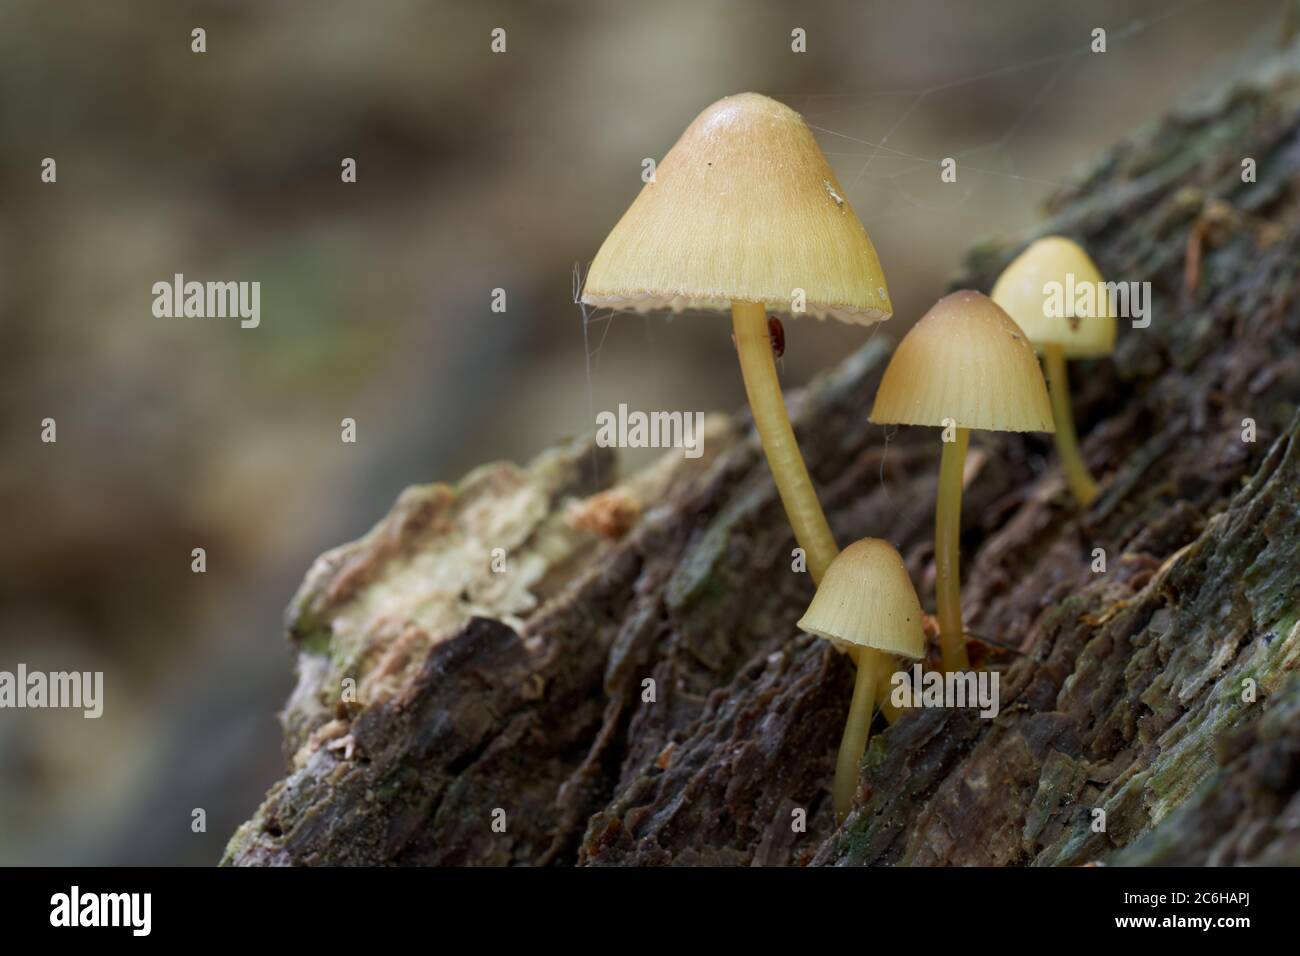 Inedible mushroom Mycena renati in the beech forest. Known as beautiful bonnet. Group of wild yellow mushrooms growing on the tree stump. Stock Photo